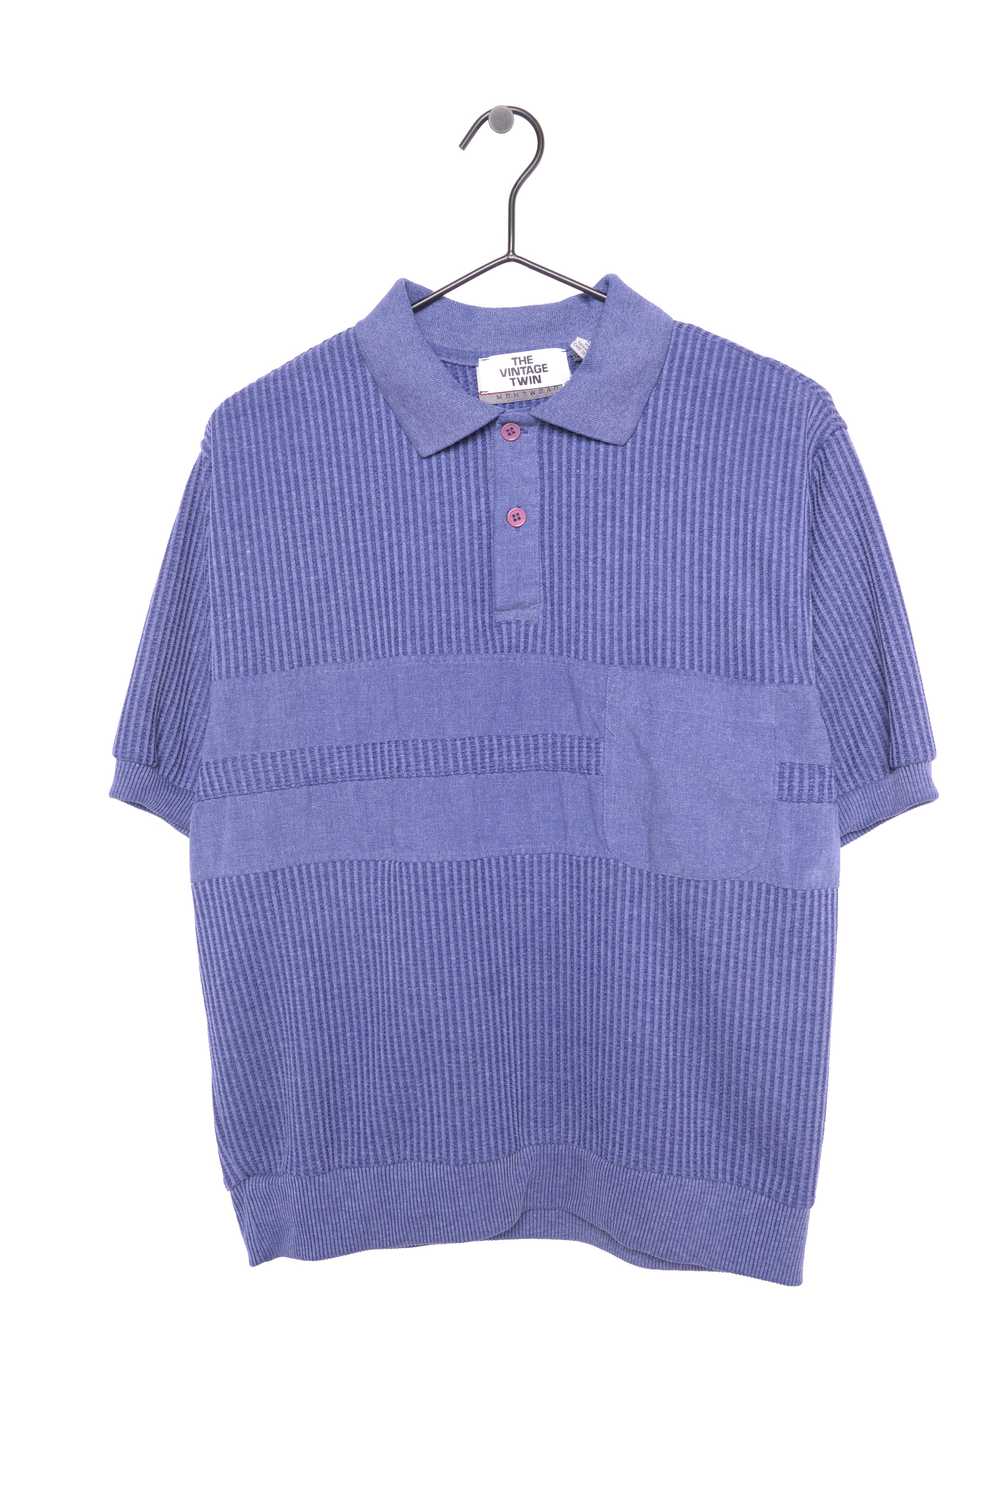 1980s Textured Polo - image 1